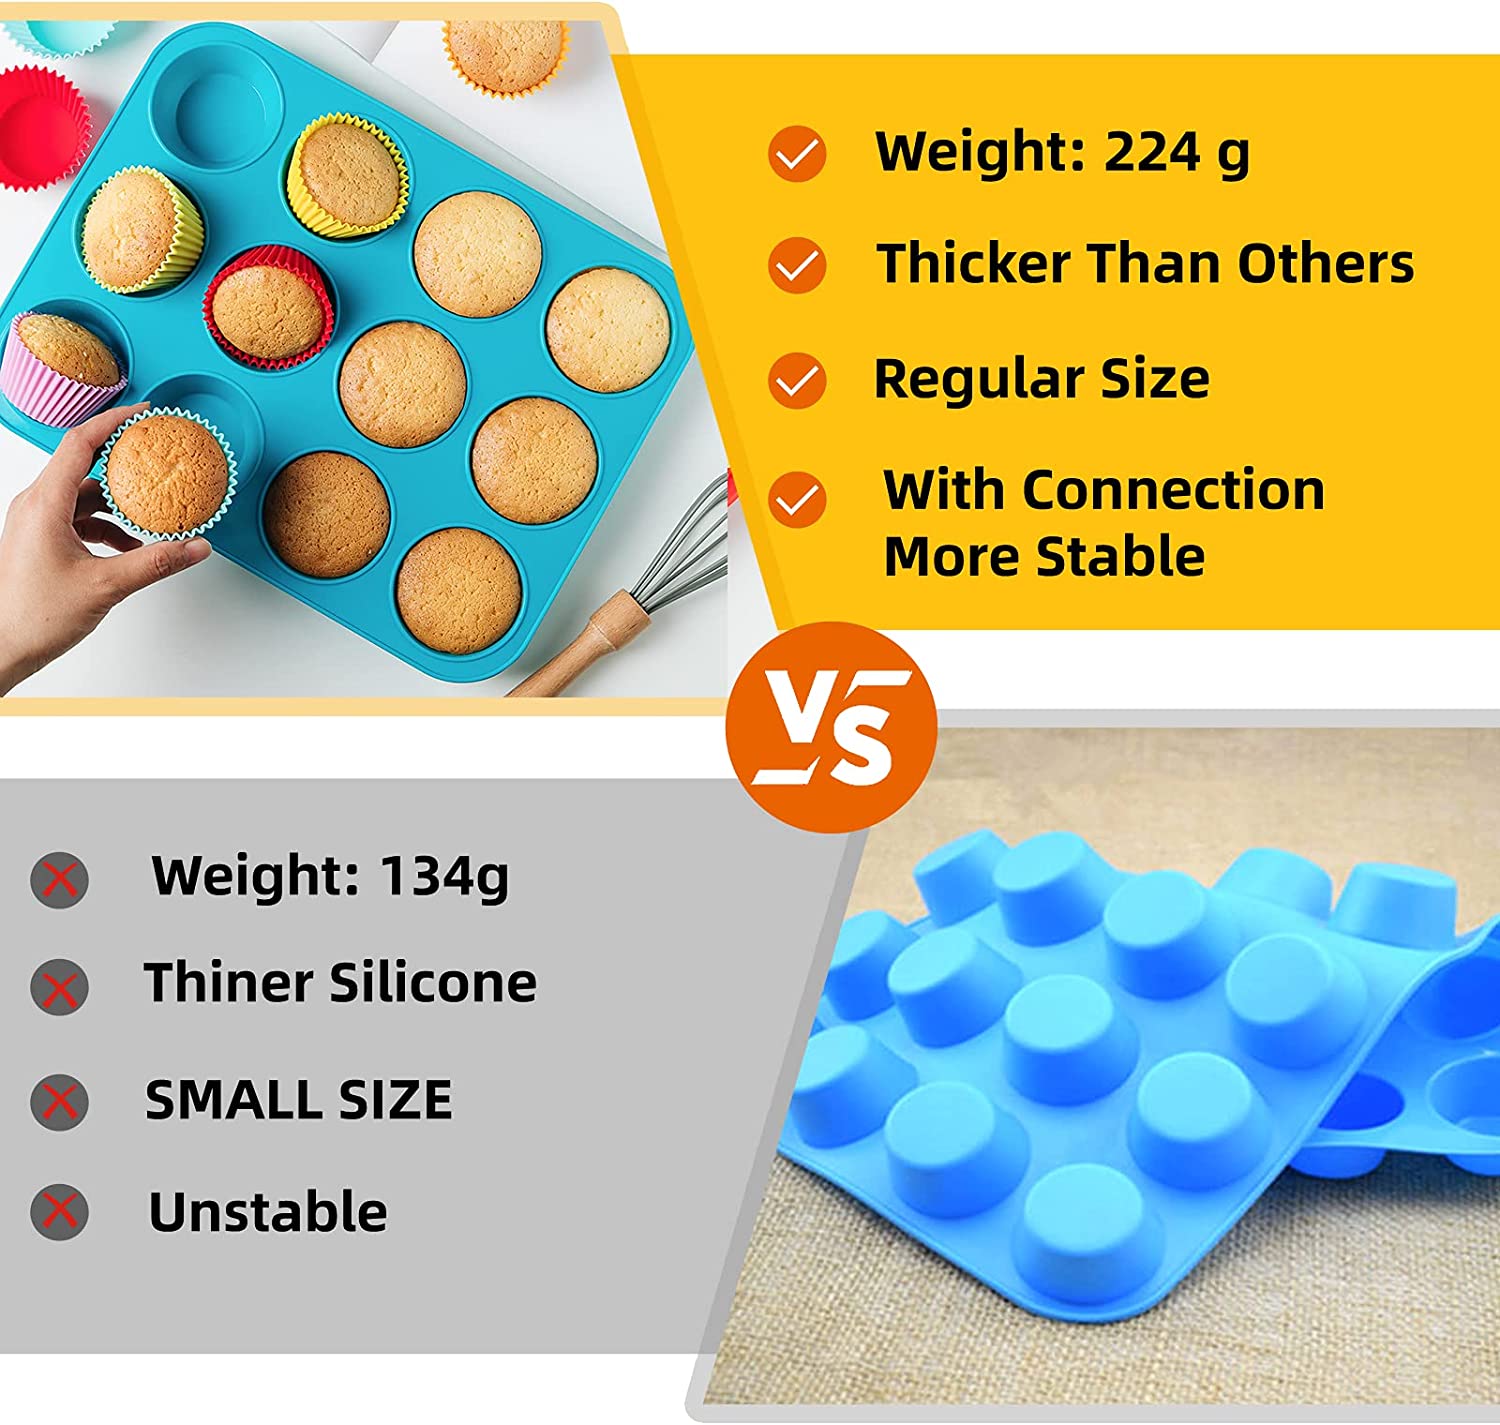 Qucoqpe Kitchen Silicone Muffin Pan - Mini 24 Cup Cupcake Pan Silicone Molds - Mini Muffin Pans Nonstick 24 Muffin Tin - Baking Rubber Tray & Fat Bomb